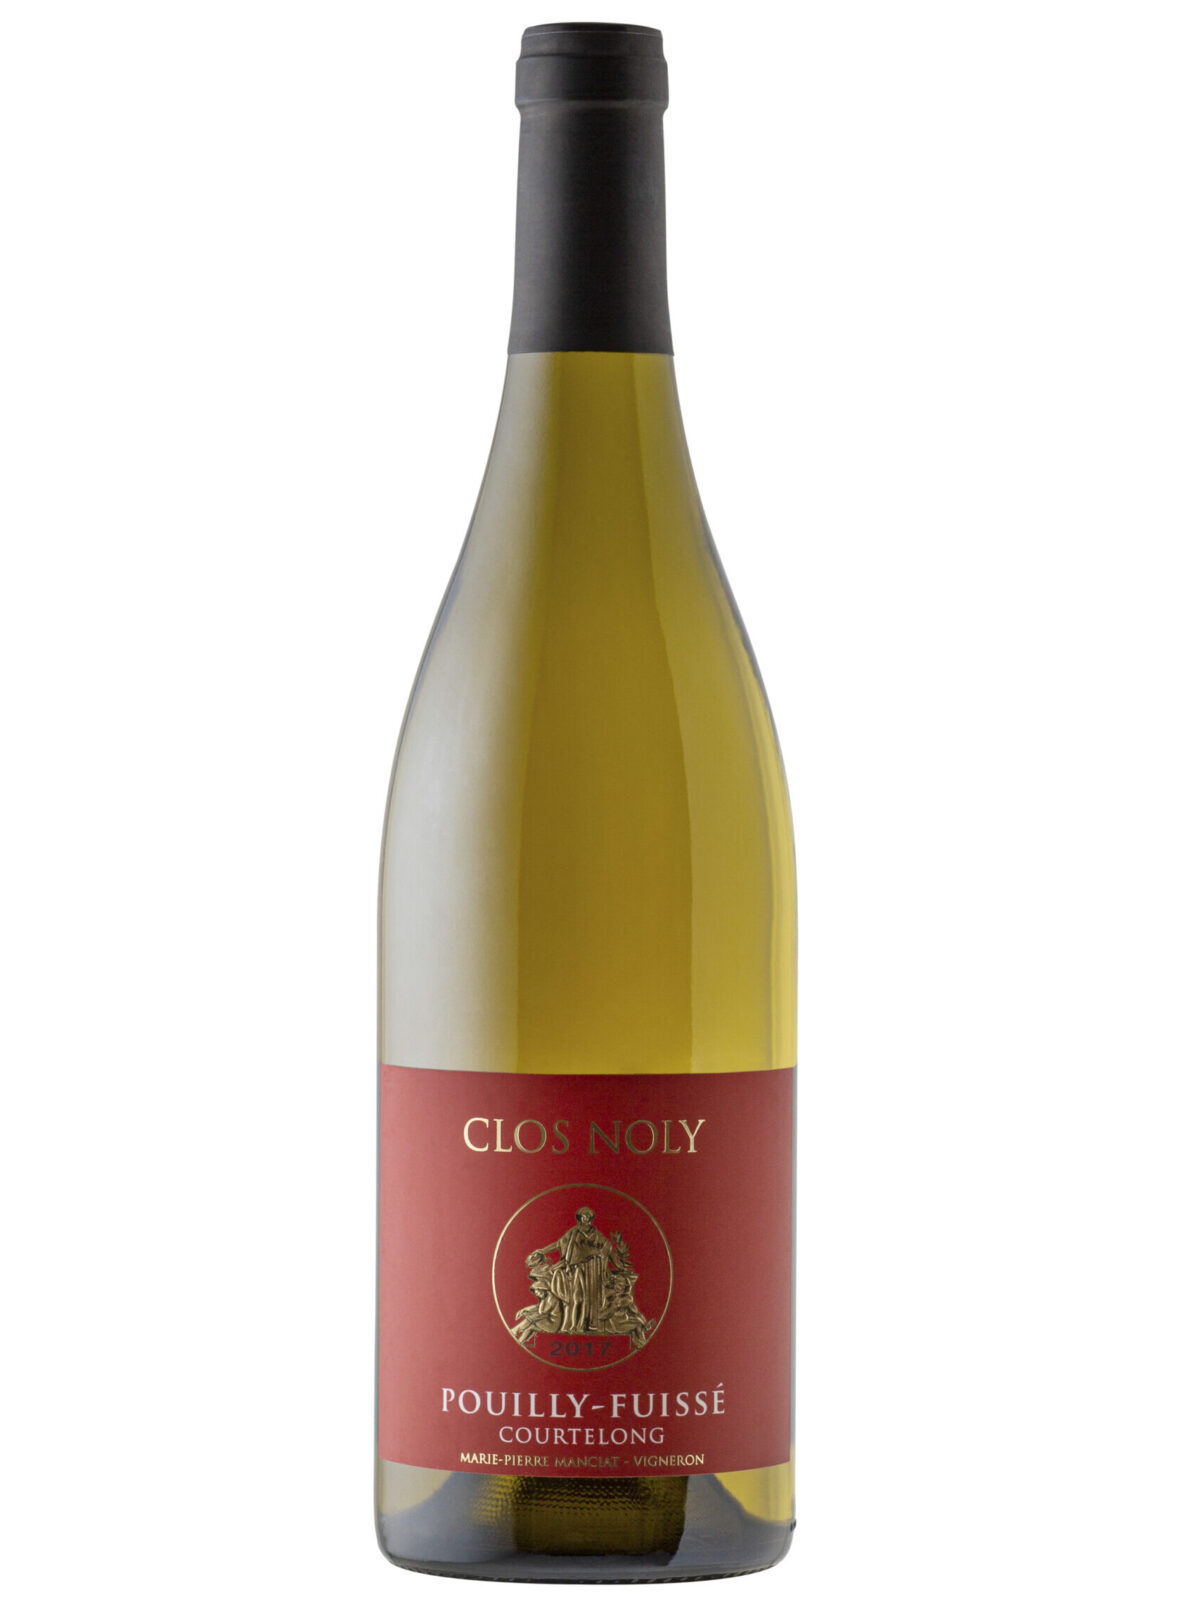 Domaine Le Clos Noly Pouilly Wine bottle with red label.